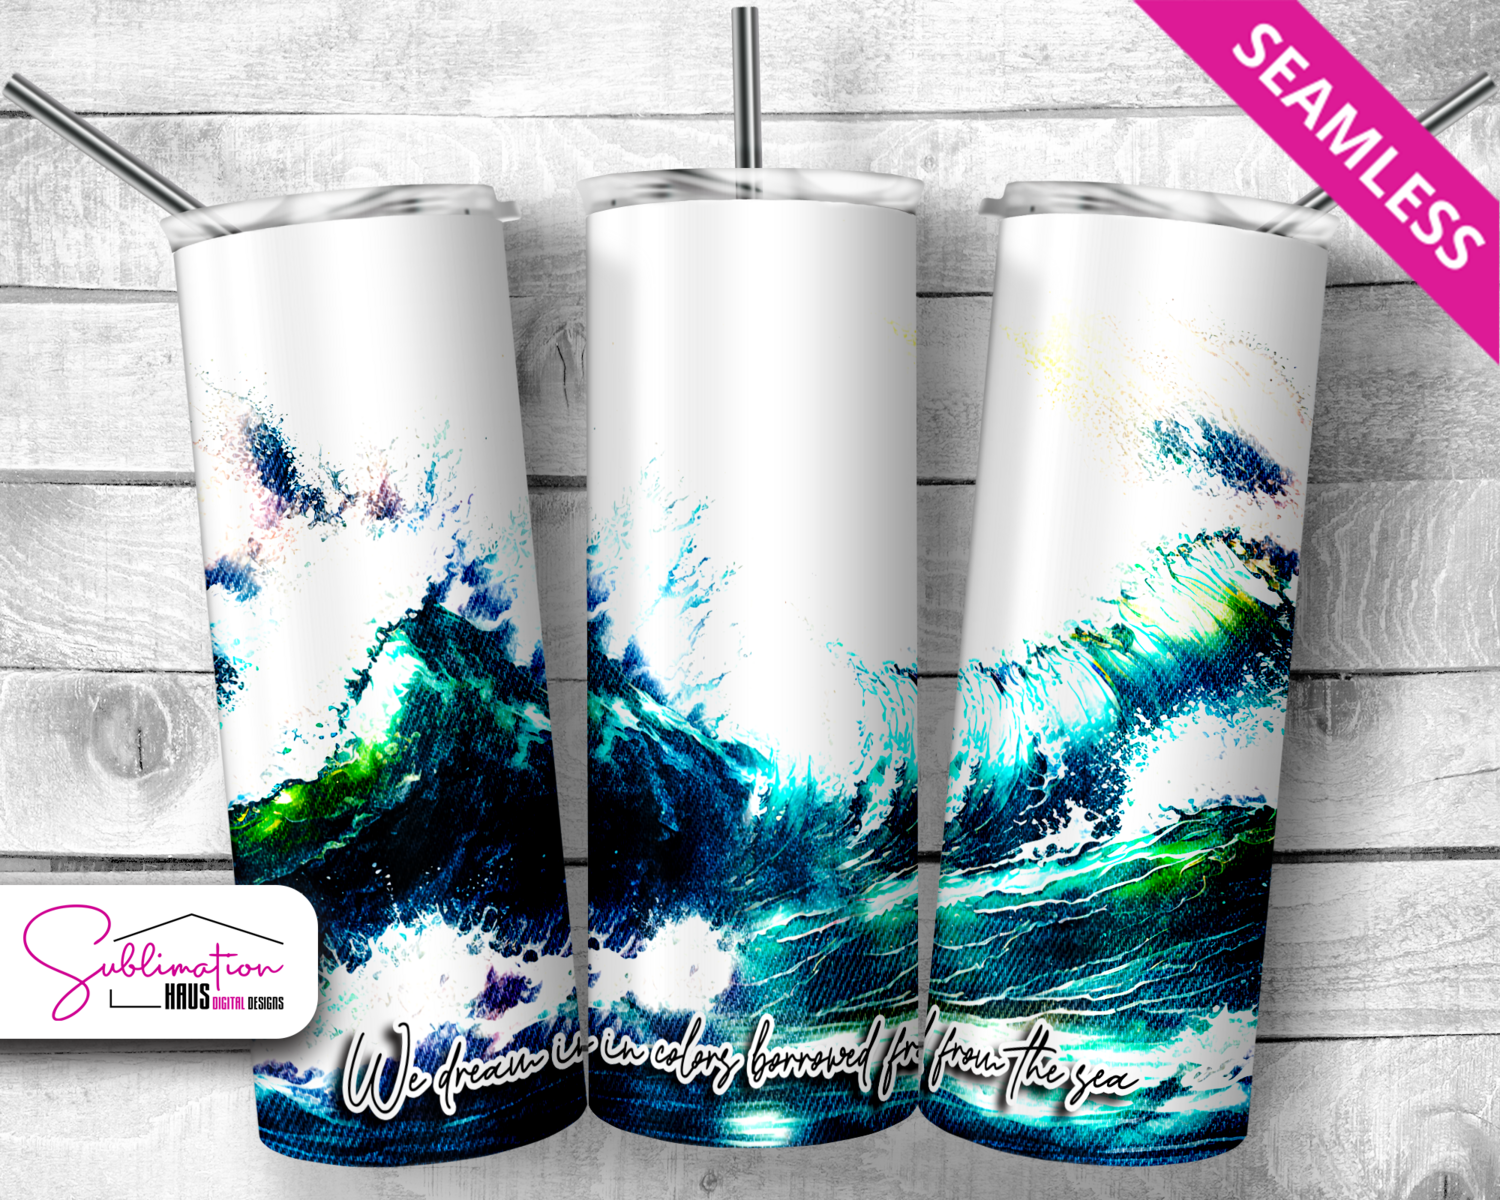 We dream in colors - 20oz Tumbler Design - BLANK INCLUDED